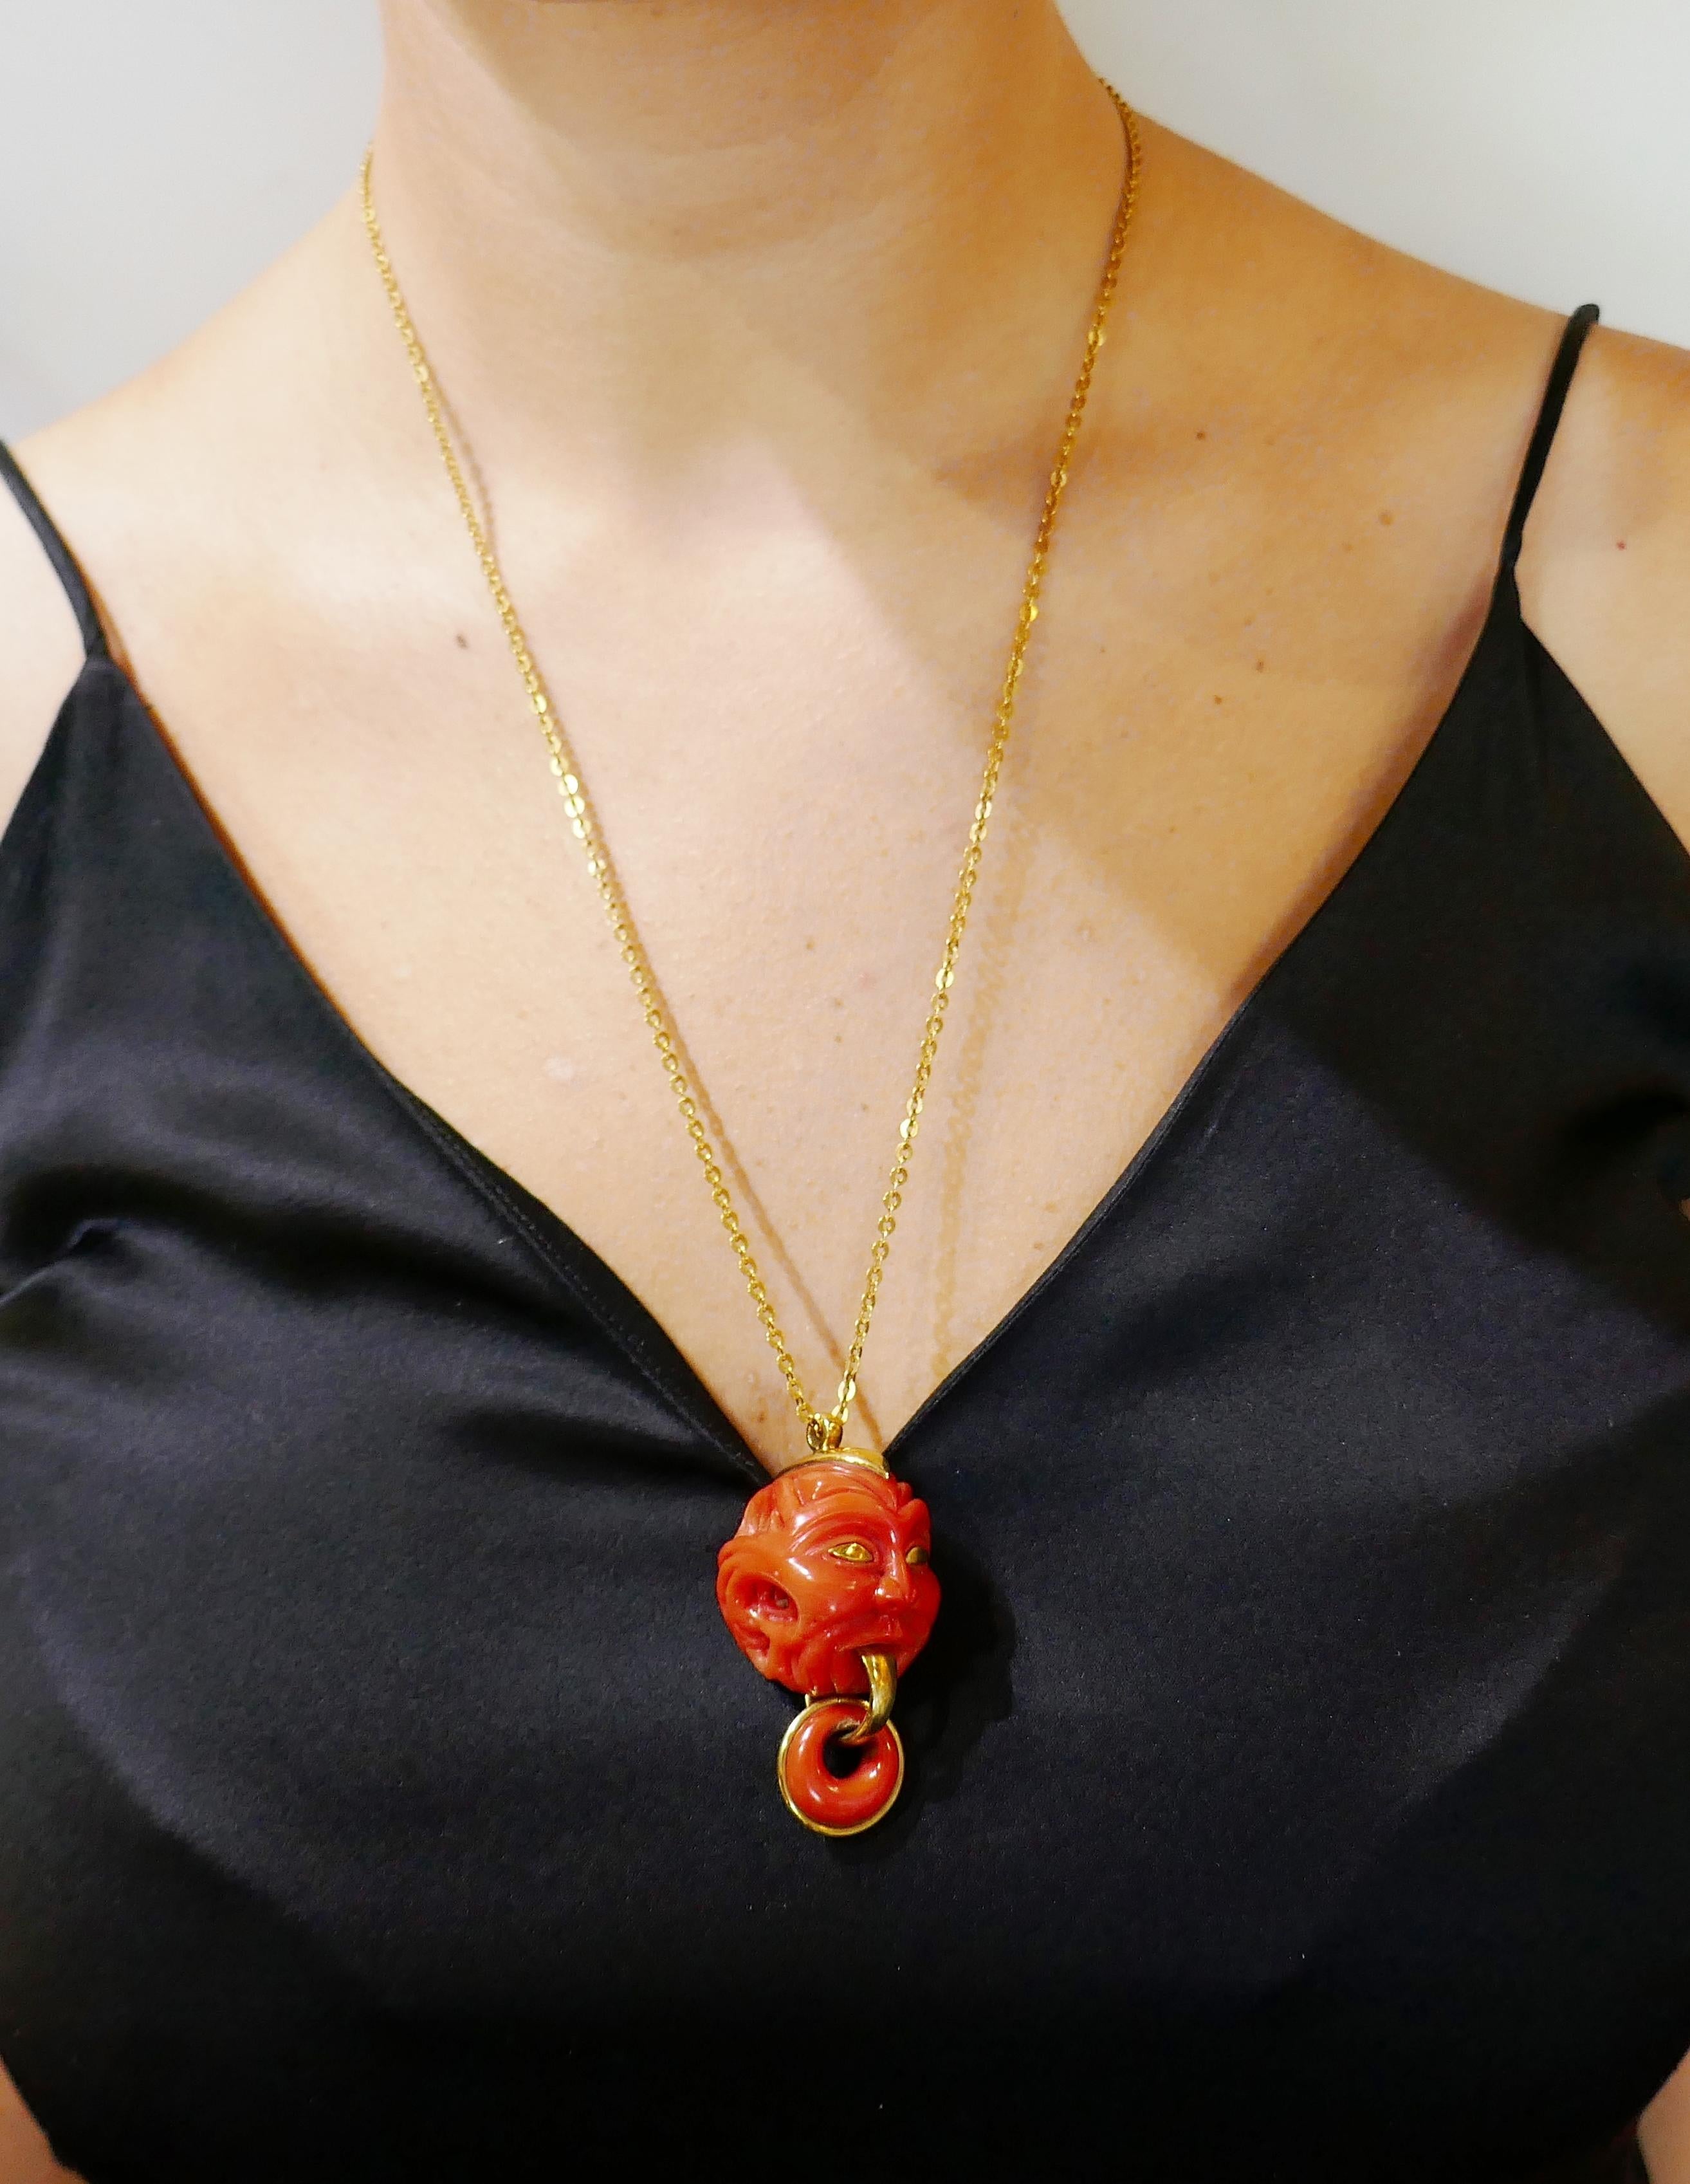 Fun and unusual coral pendant that is definitely a conversational piece. 
The pendant is made of carved Mediterranean coral and 14 karat (tested) yellow gold. It measures 2 x 1 x 1-1/8 inches (5 x 2.5 x 2.8 cm) with the bail. The chain is made of 18